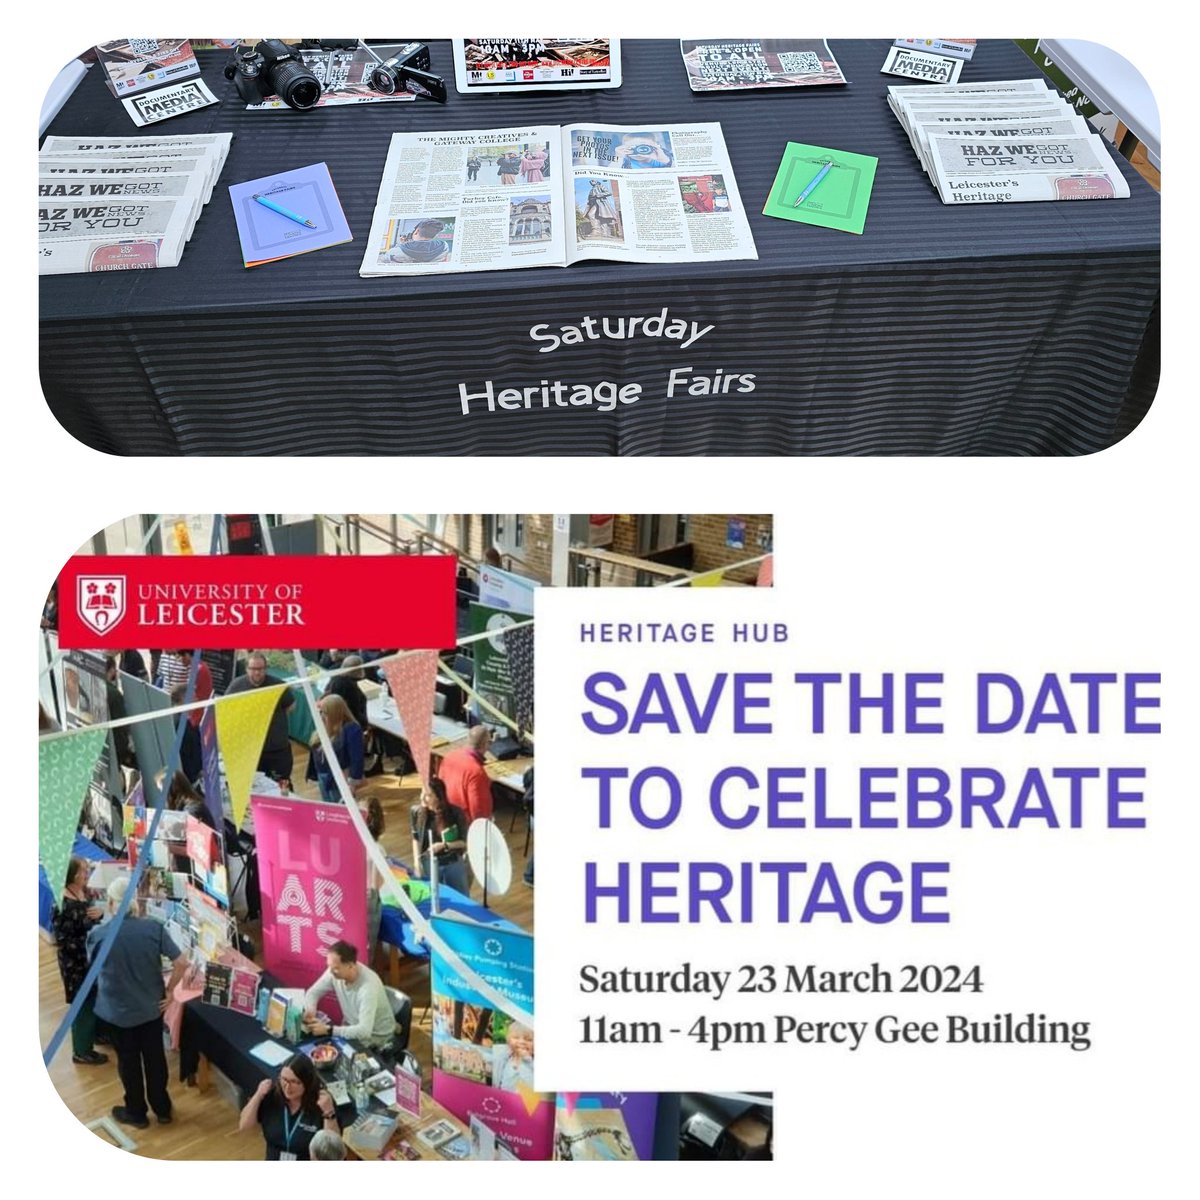 We have a Saturday Heritage Fair table at the University of Leicester's Heritage Hub @uniofleicester event today ....please come along and say hi....just seen the impressive list of exhibitors and it's not to be missed!! Starts at 11am